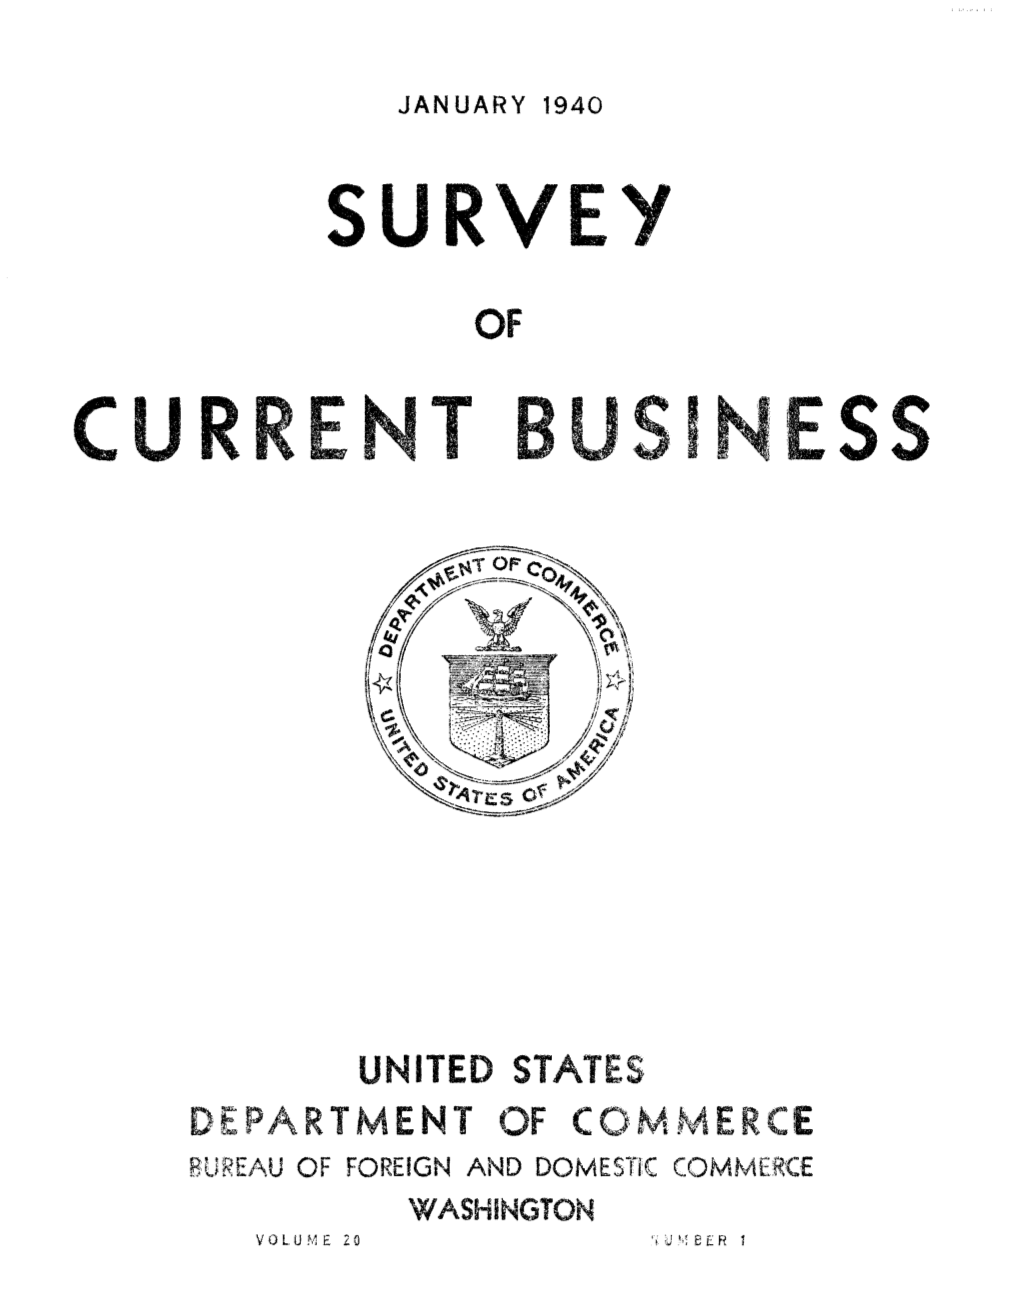 Survey of Current Business January 1940